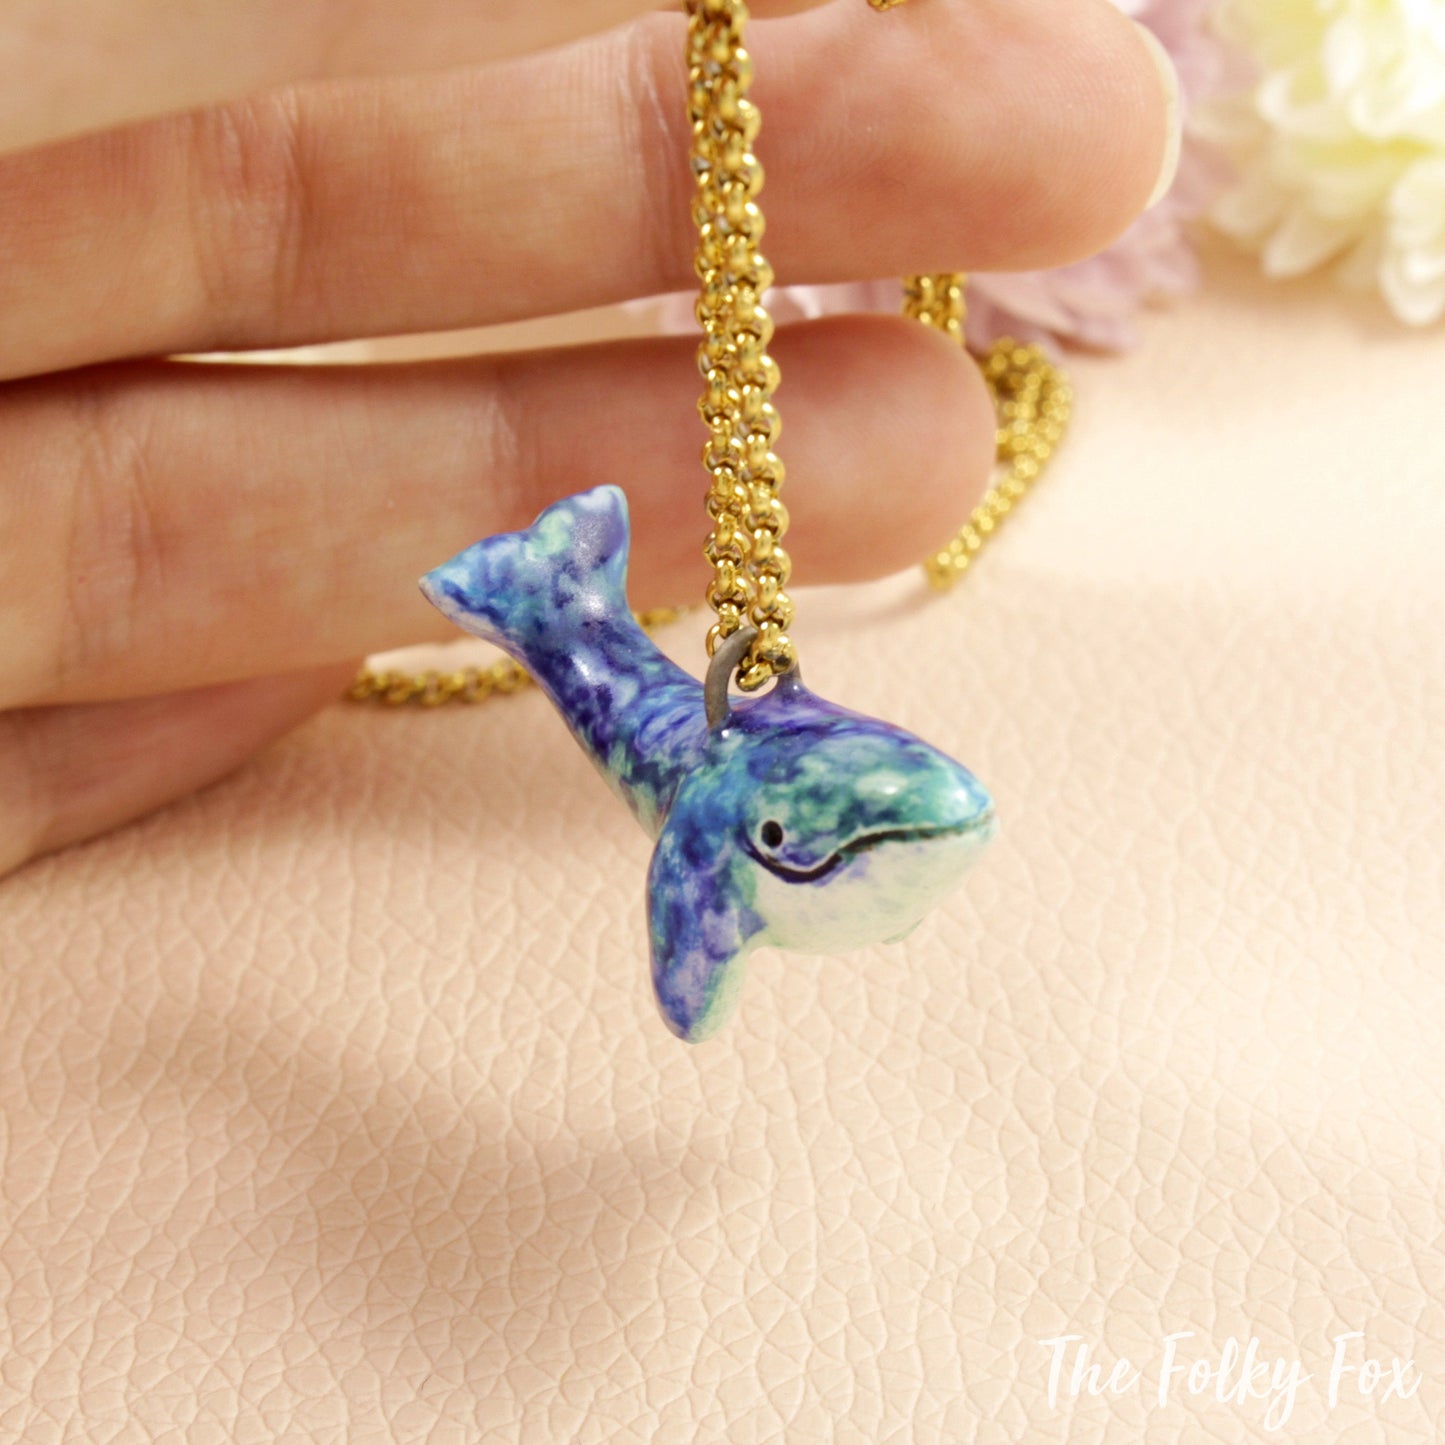 Blue Whale Necklace in Ceramic - The Folky Fox